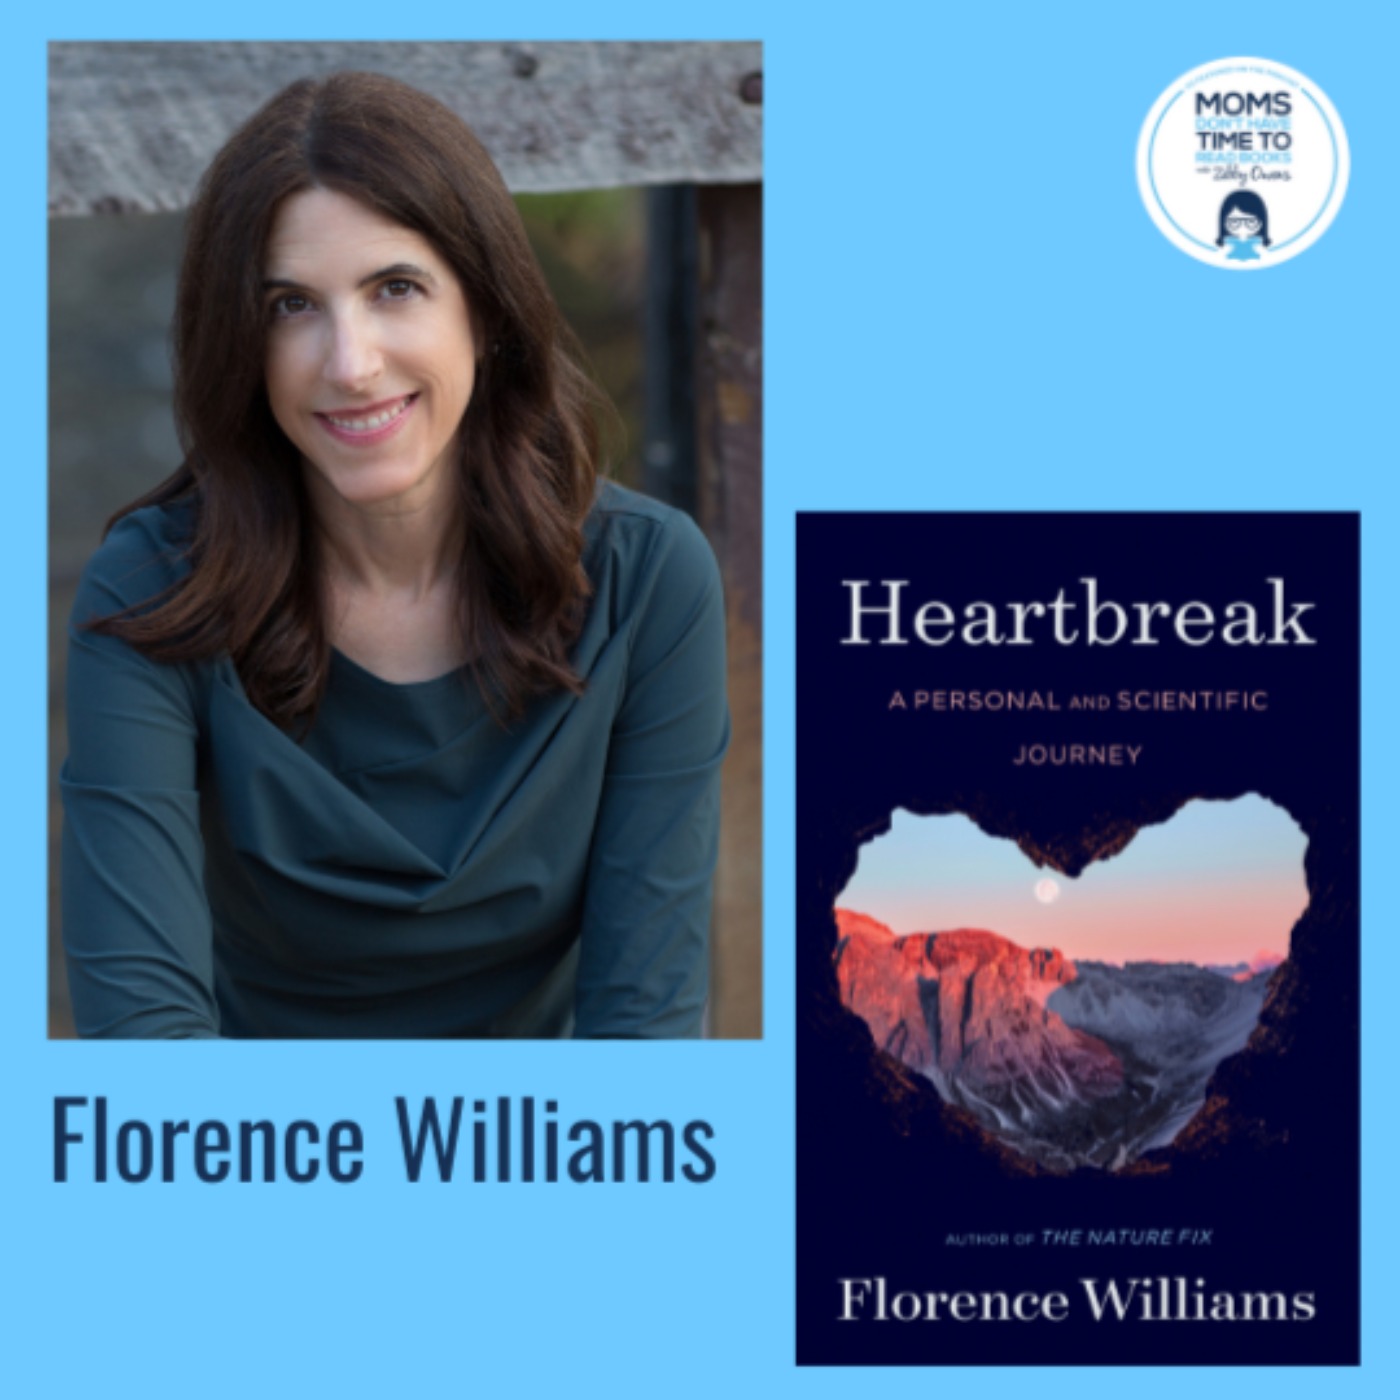 Florence Williams, HEARTBREAK: A Personal and Scientific Journey